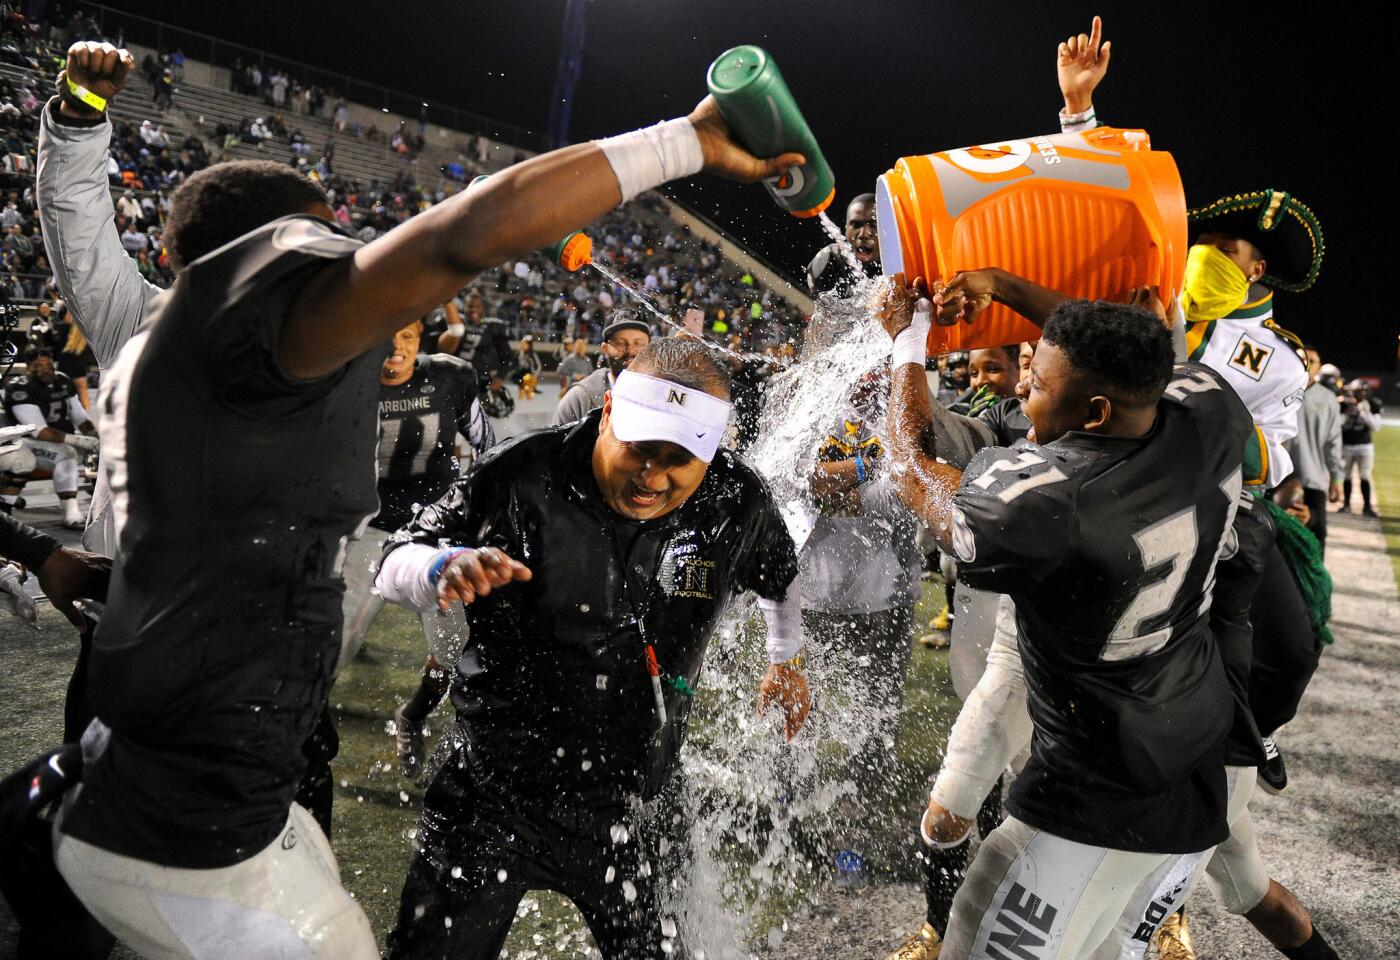 Narbonne Coach Manuel Douglas gets doused with water by his players after beating Crenshaw, 57-21, in the City Section Division I championship on Dec. 5.